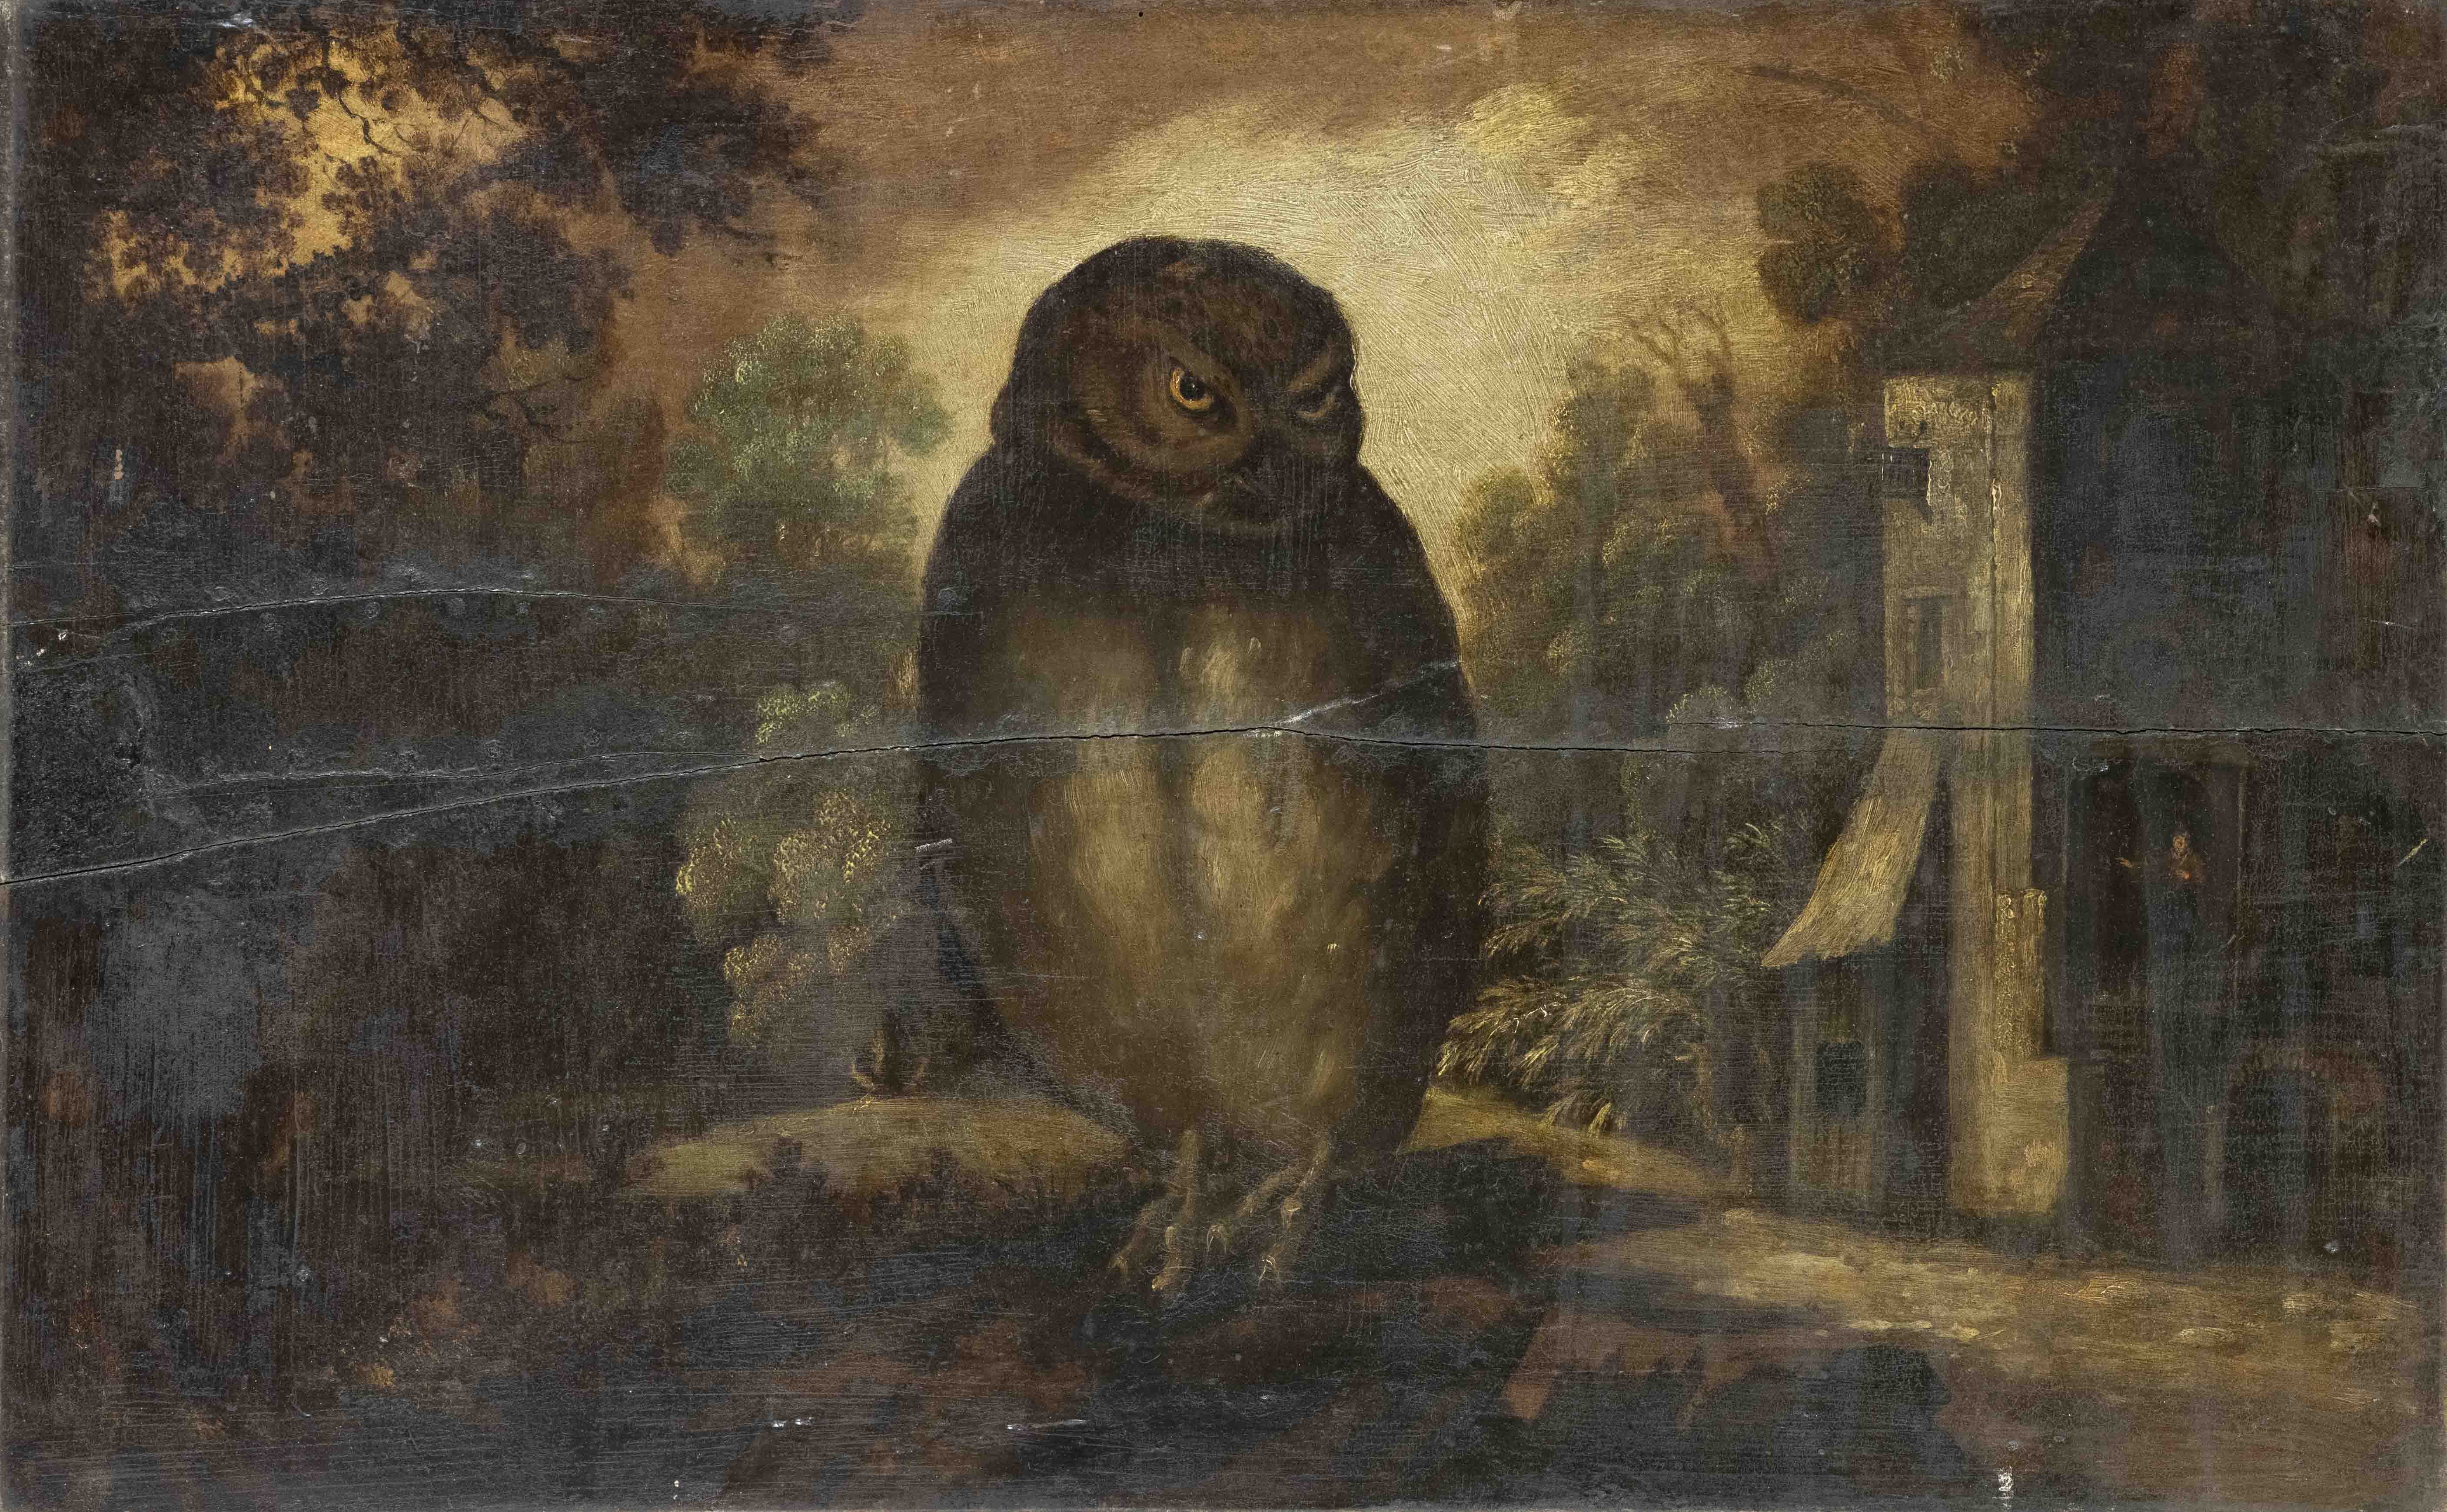 German painter of the 18th century, Owl in front of dark landscape with tower house, oil on wood